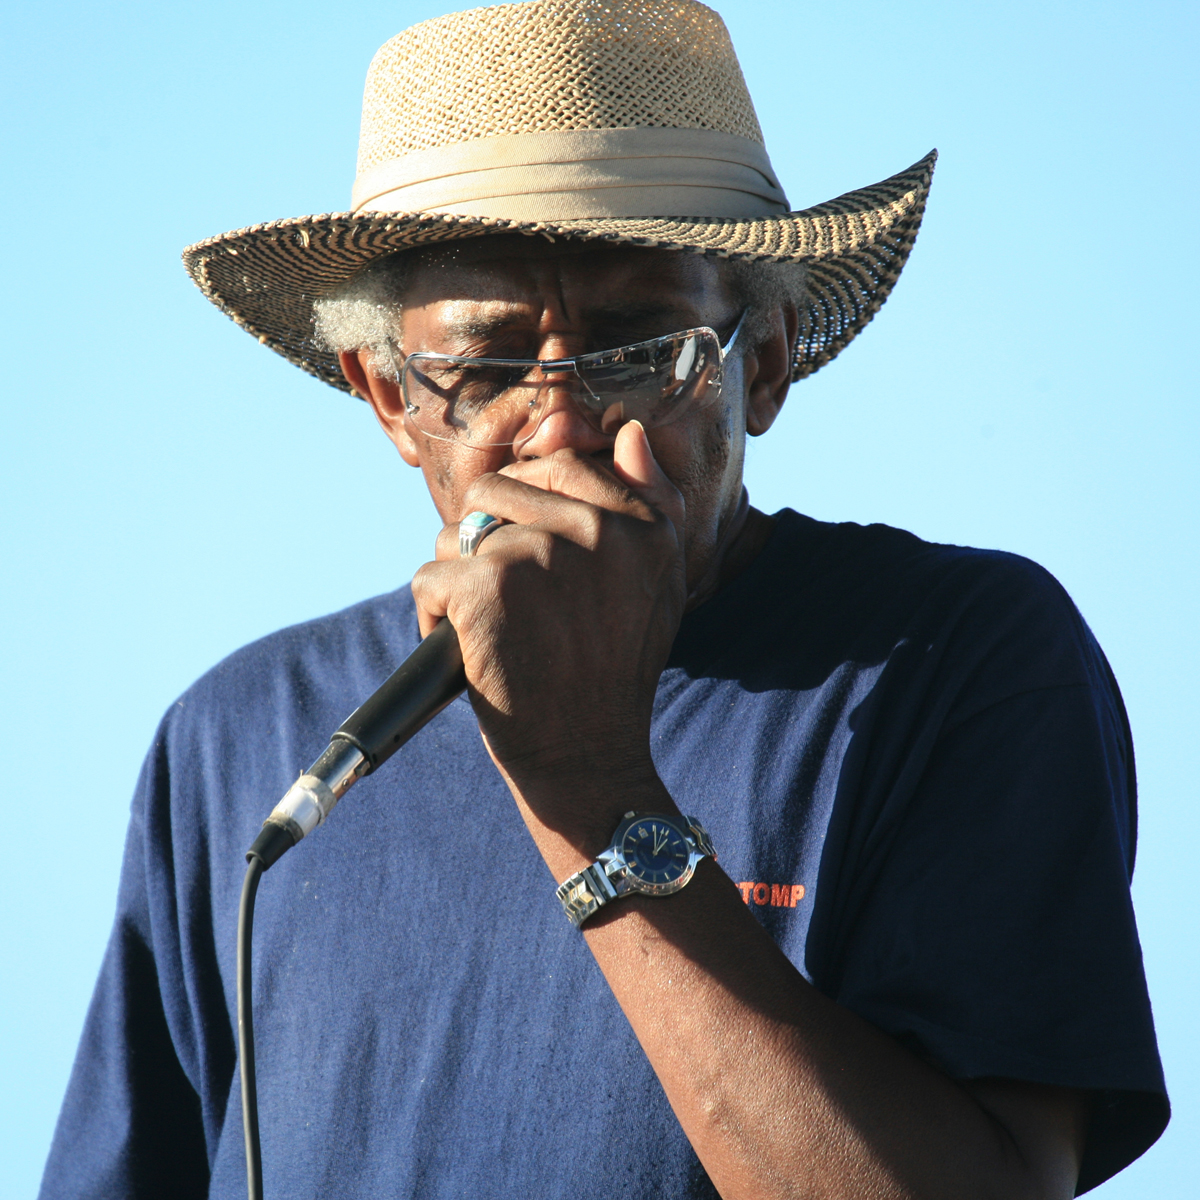 a man is wearing a straw hat and singing into a microphone